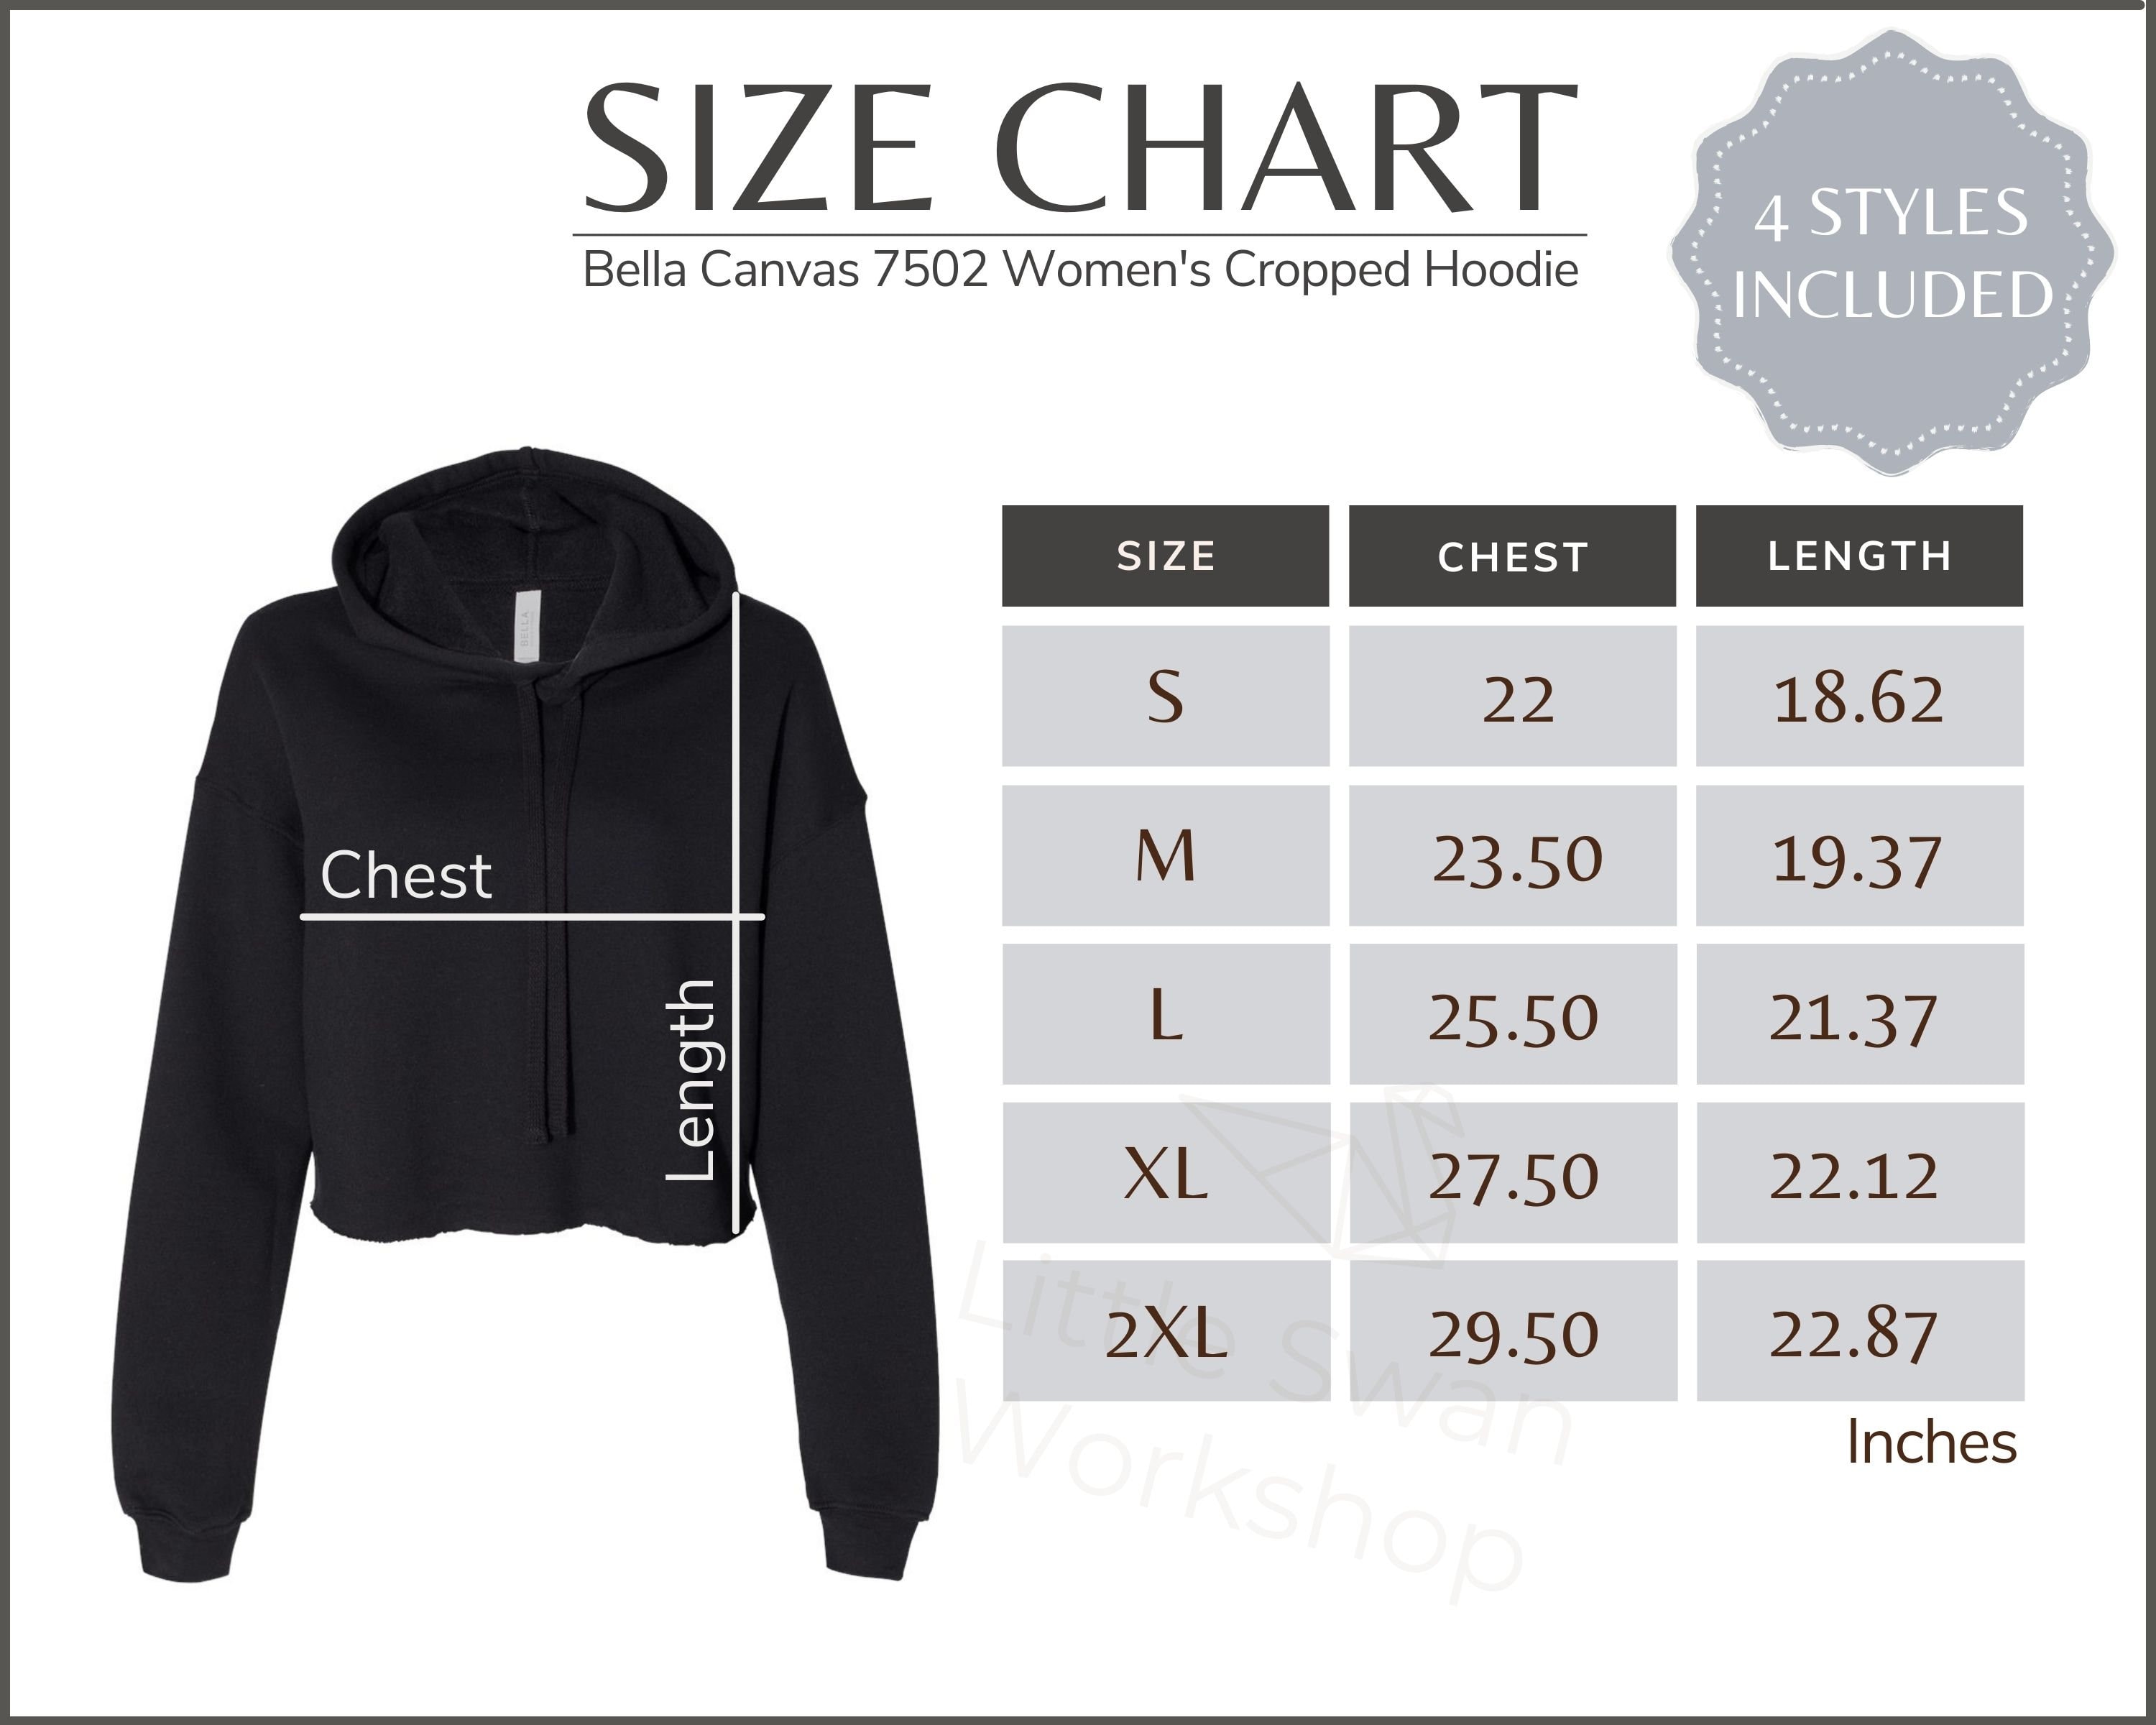 Bella Canvas 7502 Size Chart 7502 Women's Cropped Fleece Hoodie Size Table  Bella Canvas 7502 Mockup and Size Guide, White Background -  Canada